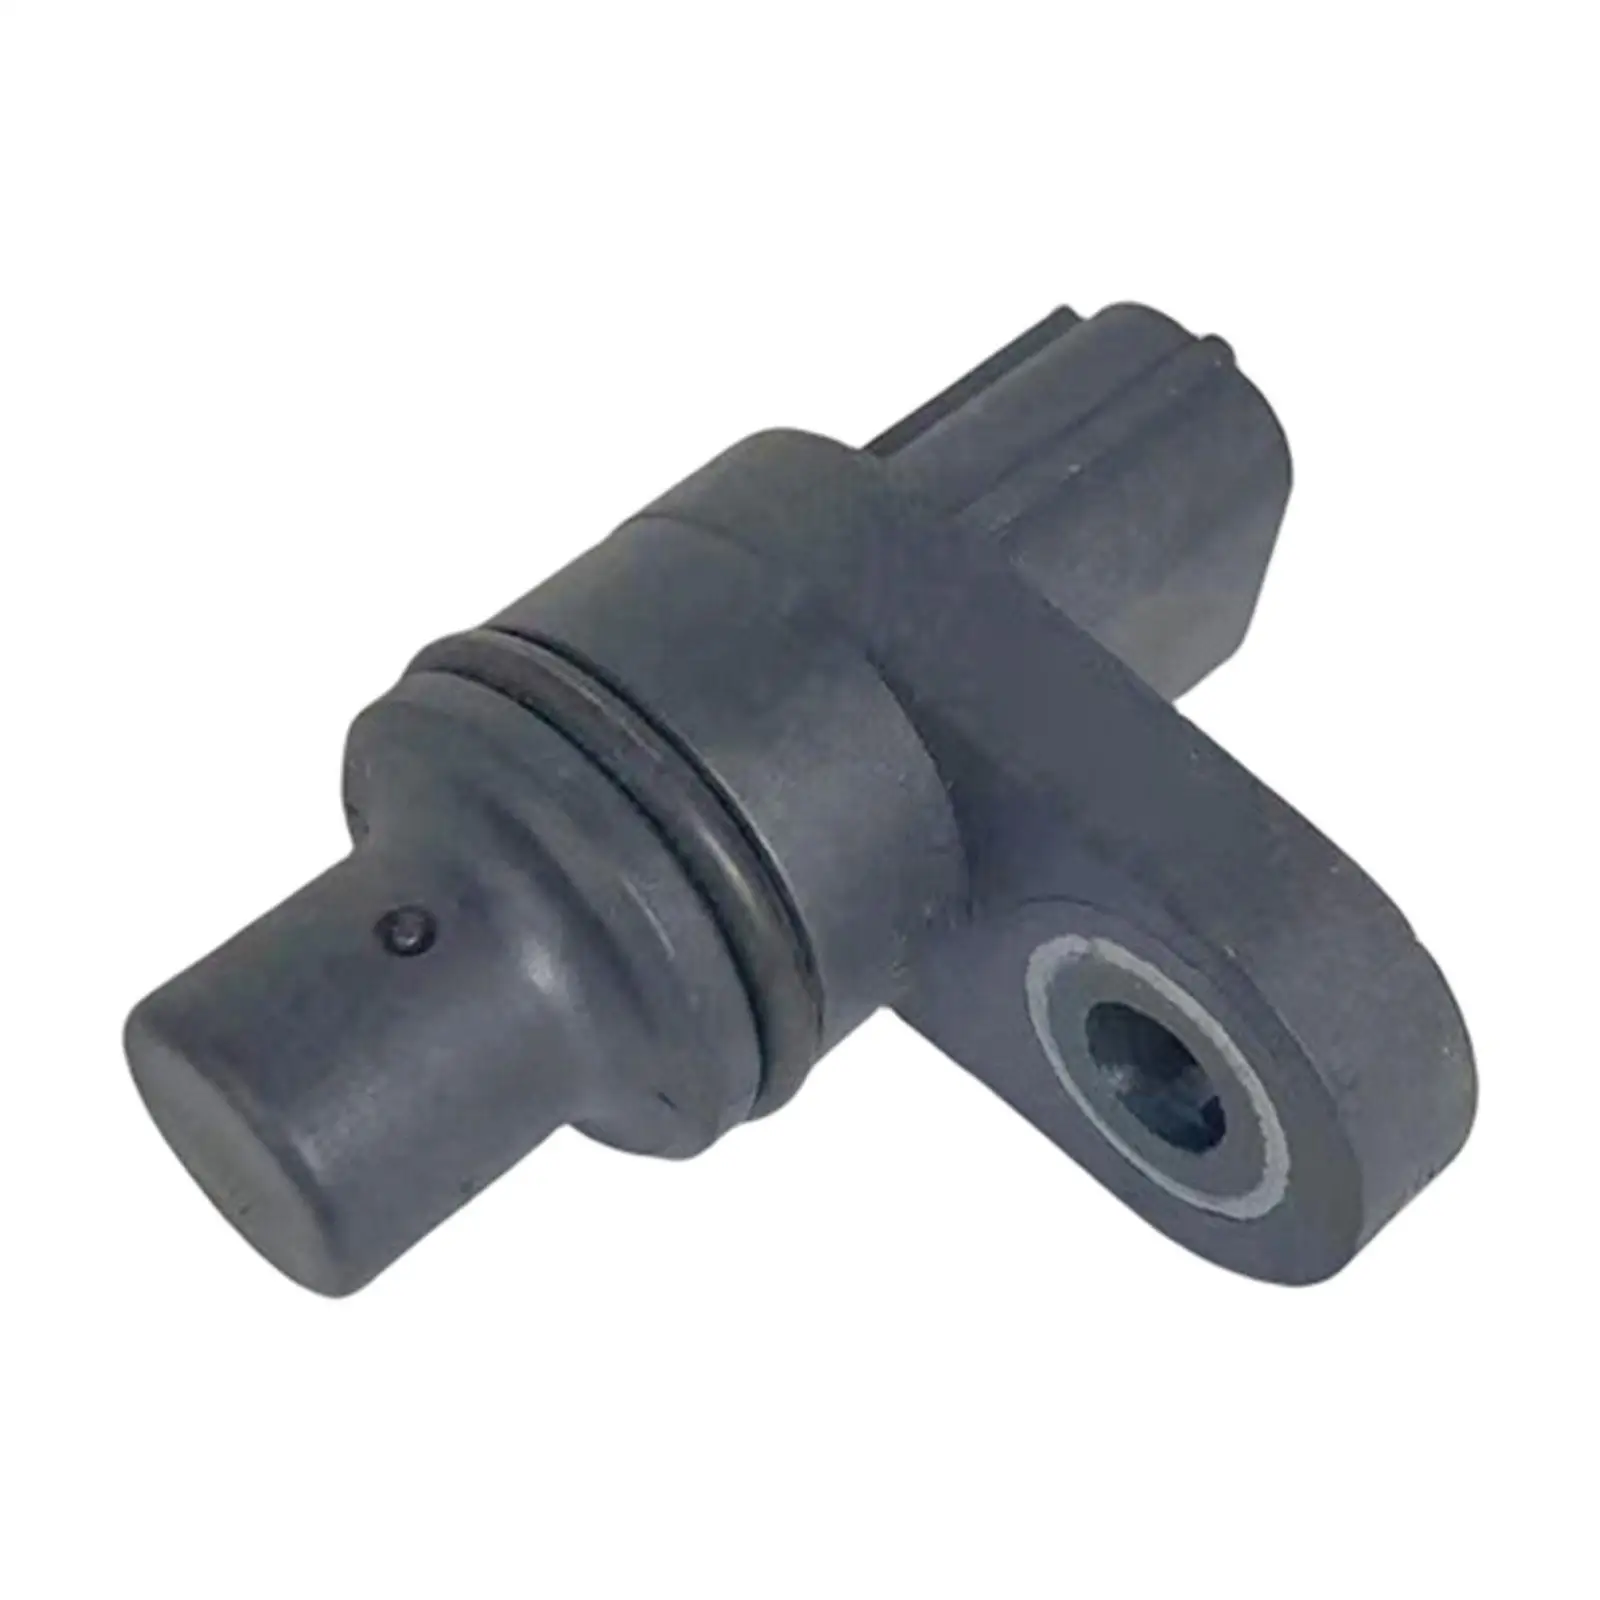 Transmission Speed Sensor 28810-5RG-004 Replace Easily Install Replacement